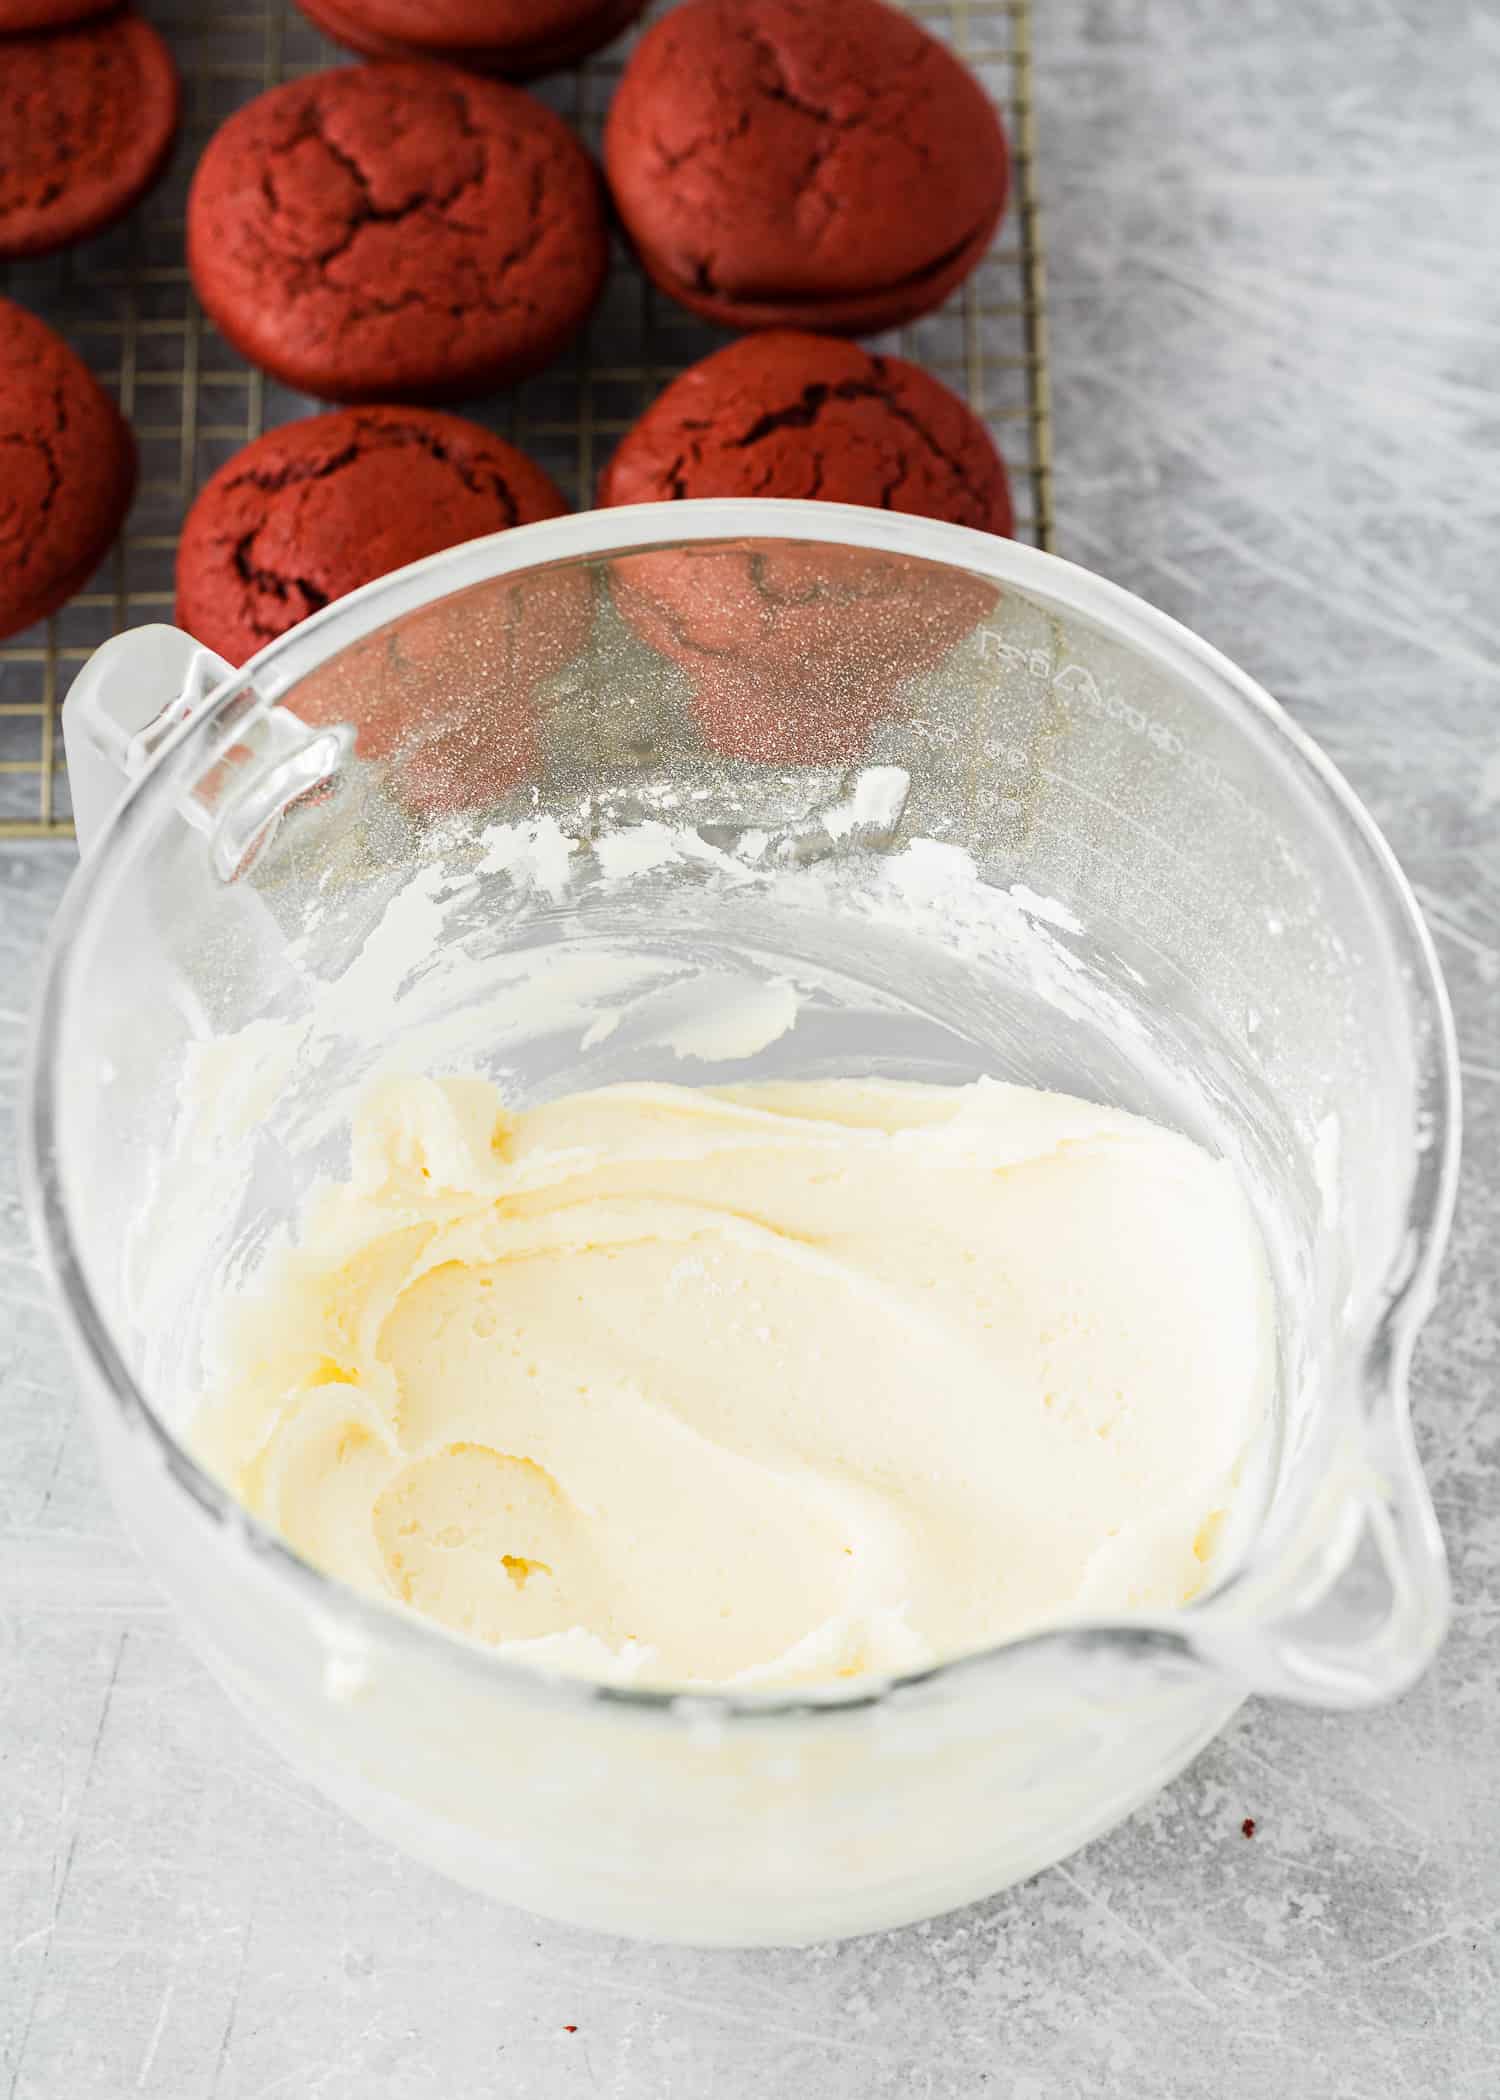 Cream cheese frosting for whoopie pies